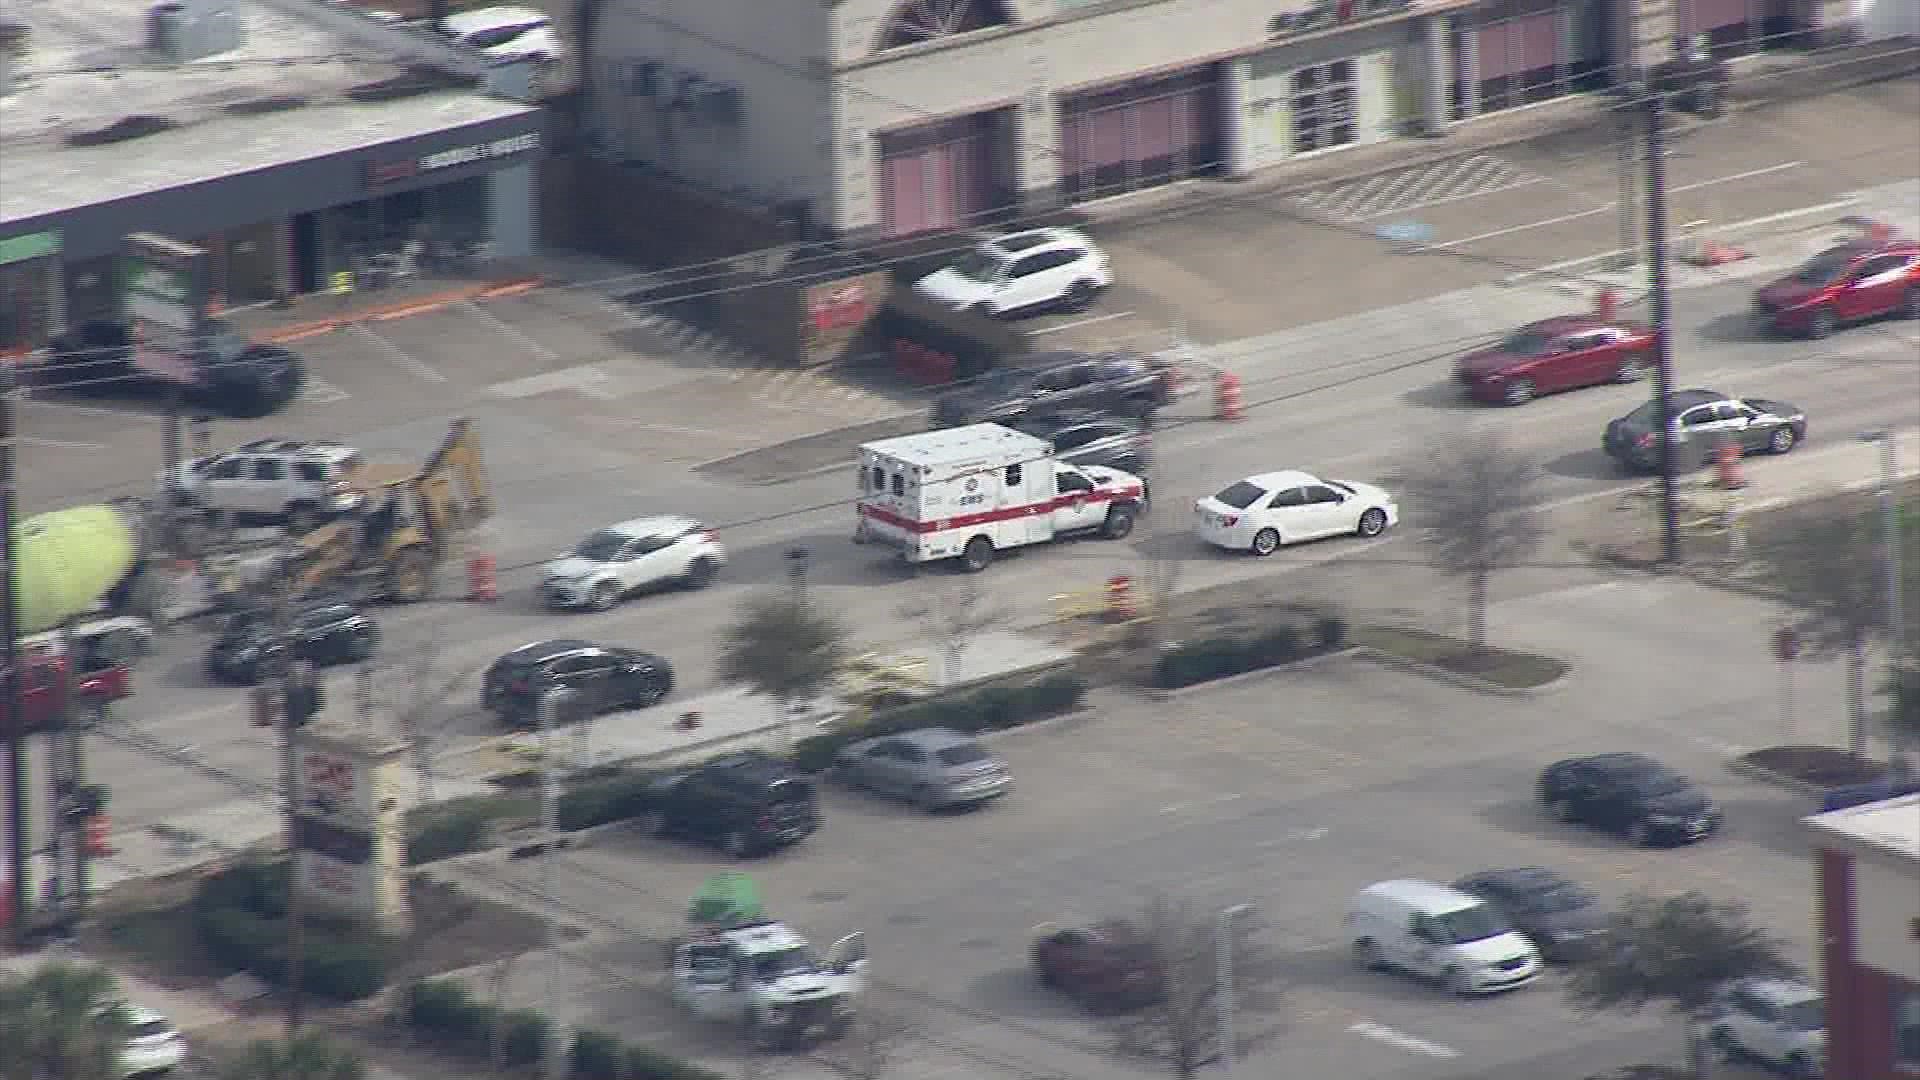 The ambulance was reportedly stolen from HFD Fire Station #17, which is east of downtown, the department said.